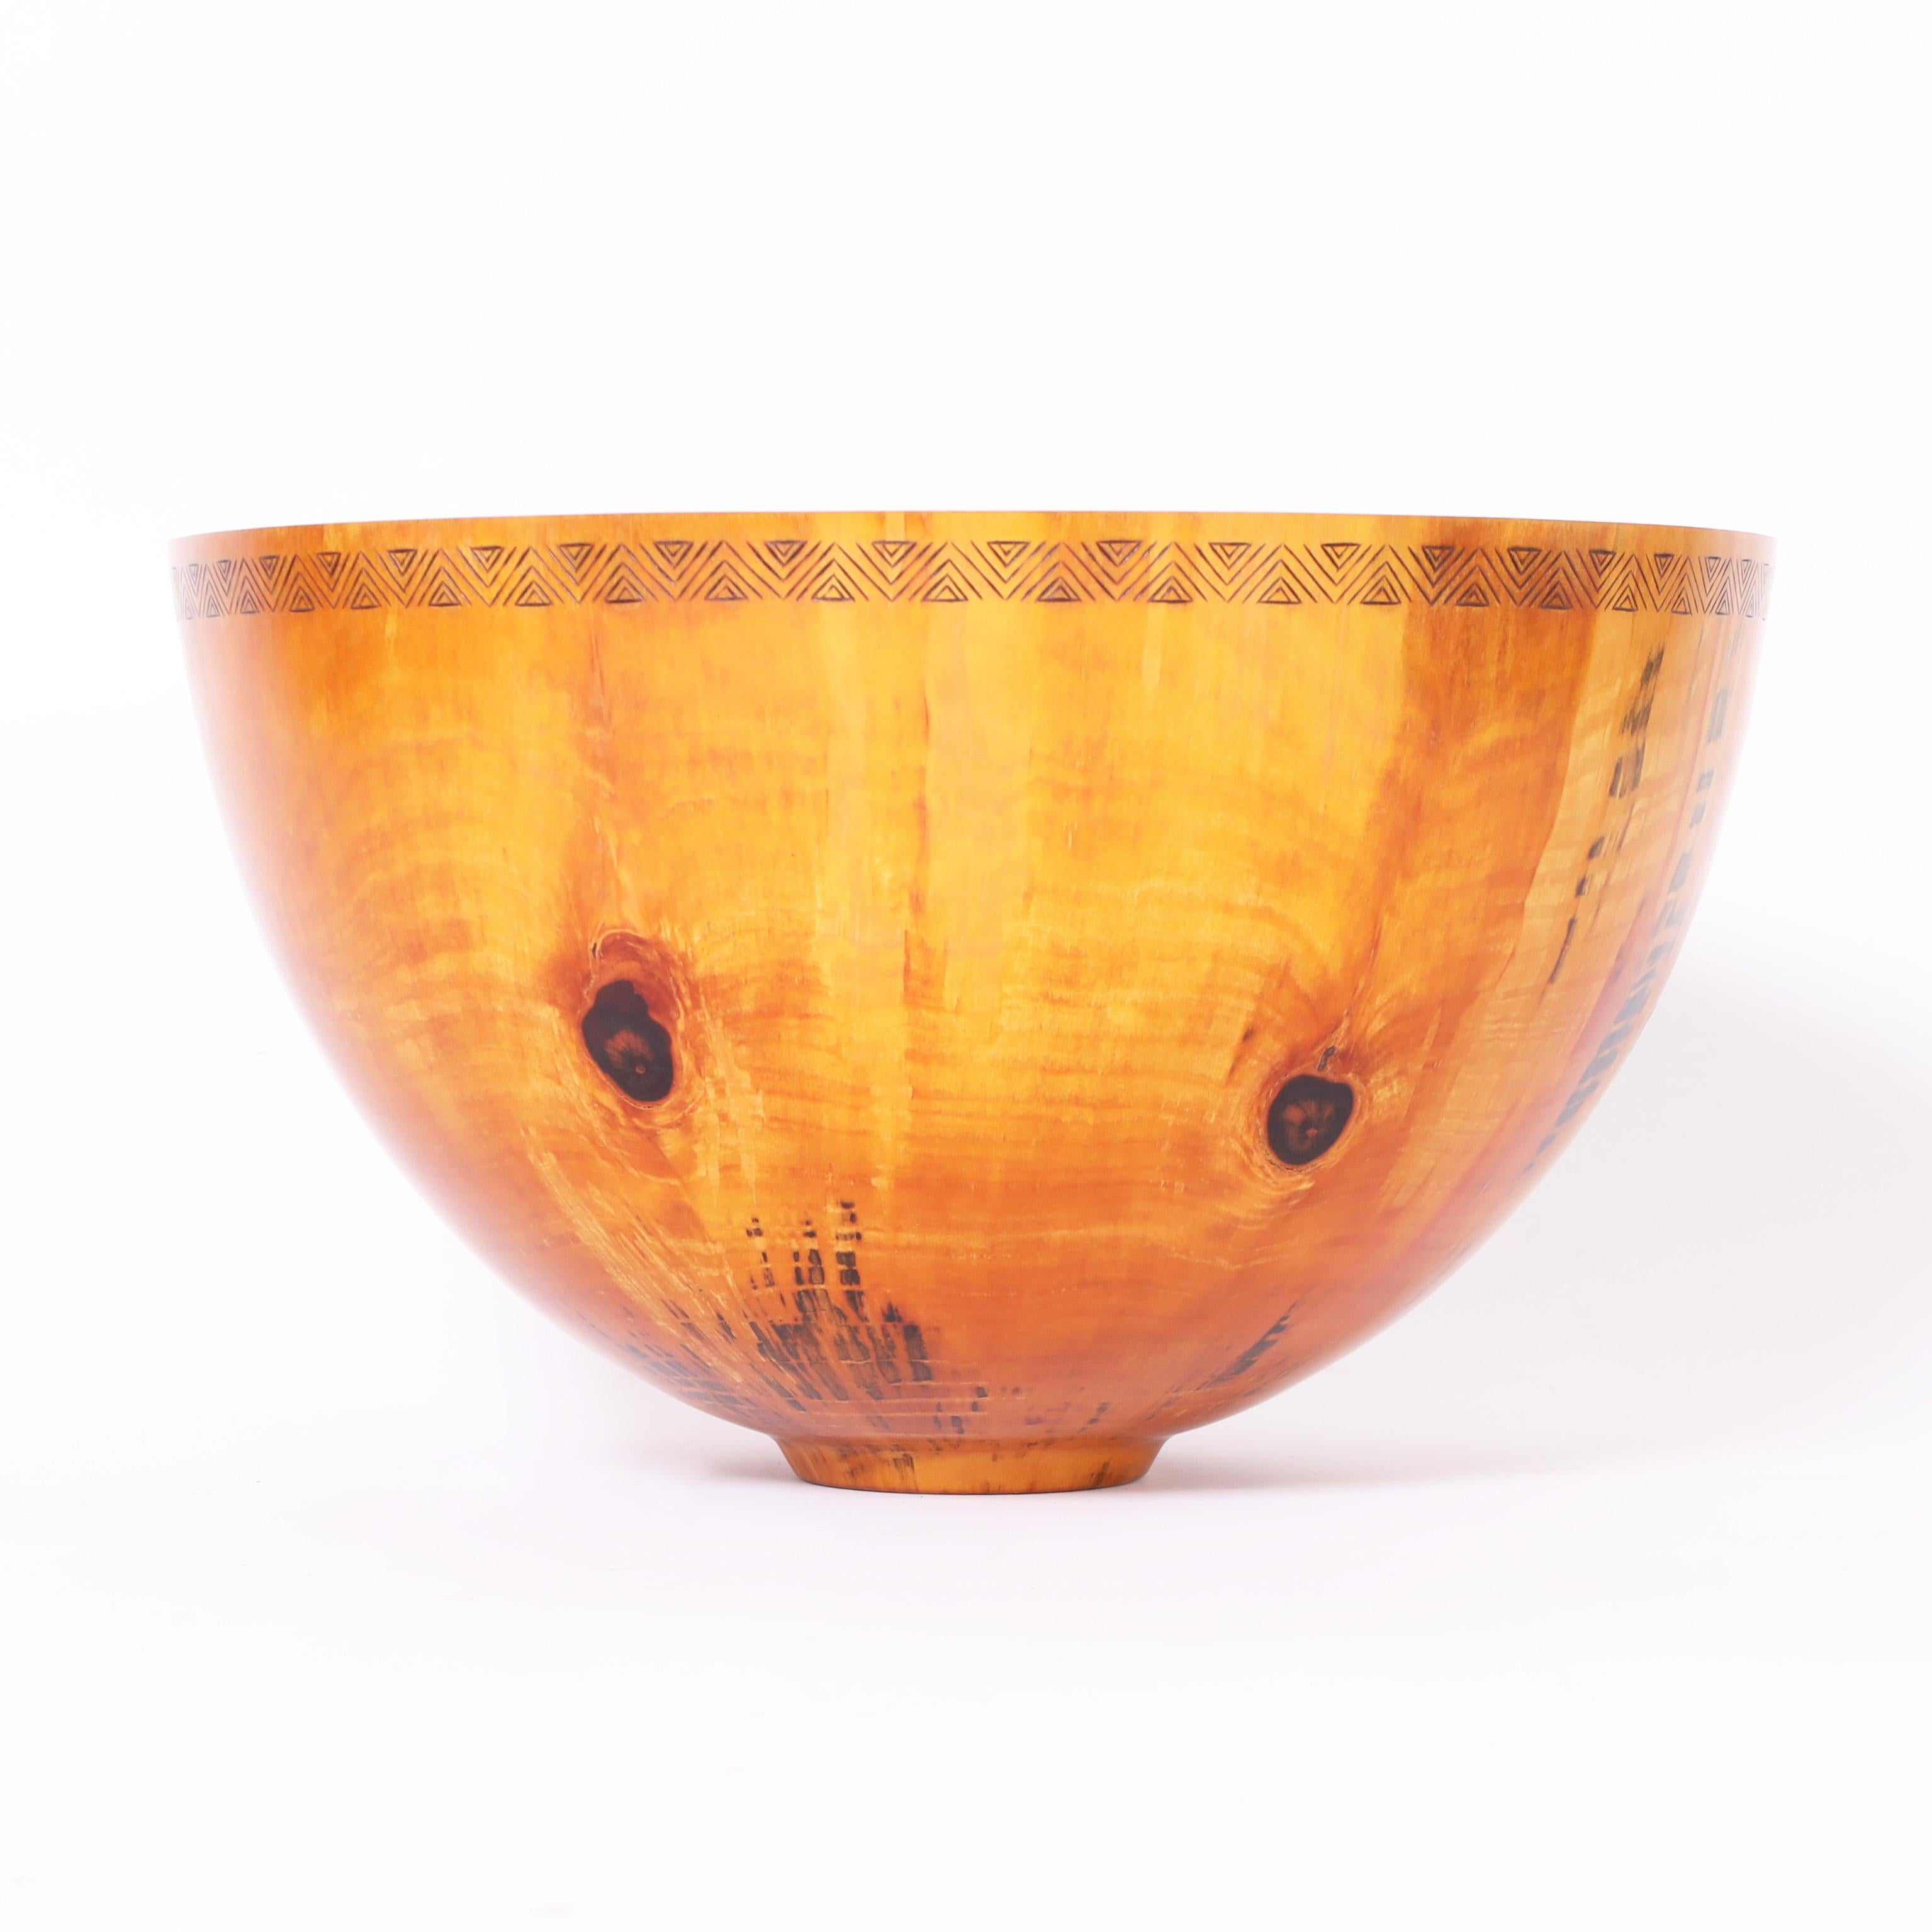 Impressive large scale bowl crafted in Norfolk Pine, a hard wood particularly suited for turning. Michael Patrick Smith is an American artist working in Hawaii not only works the lathe but creates the burned designs or pyrography. 